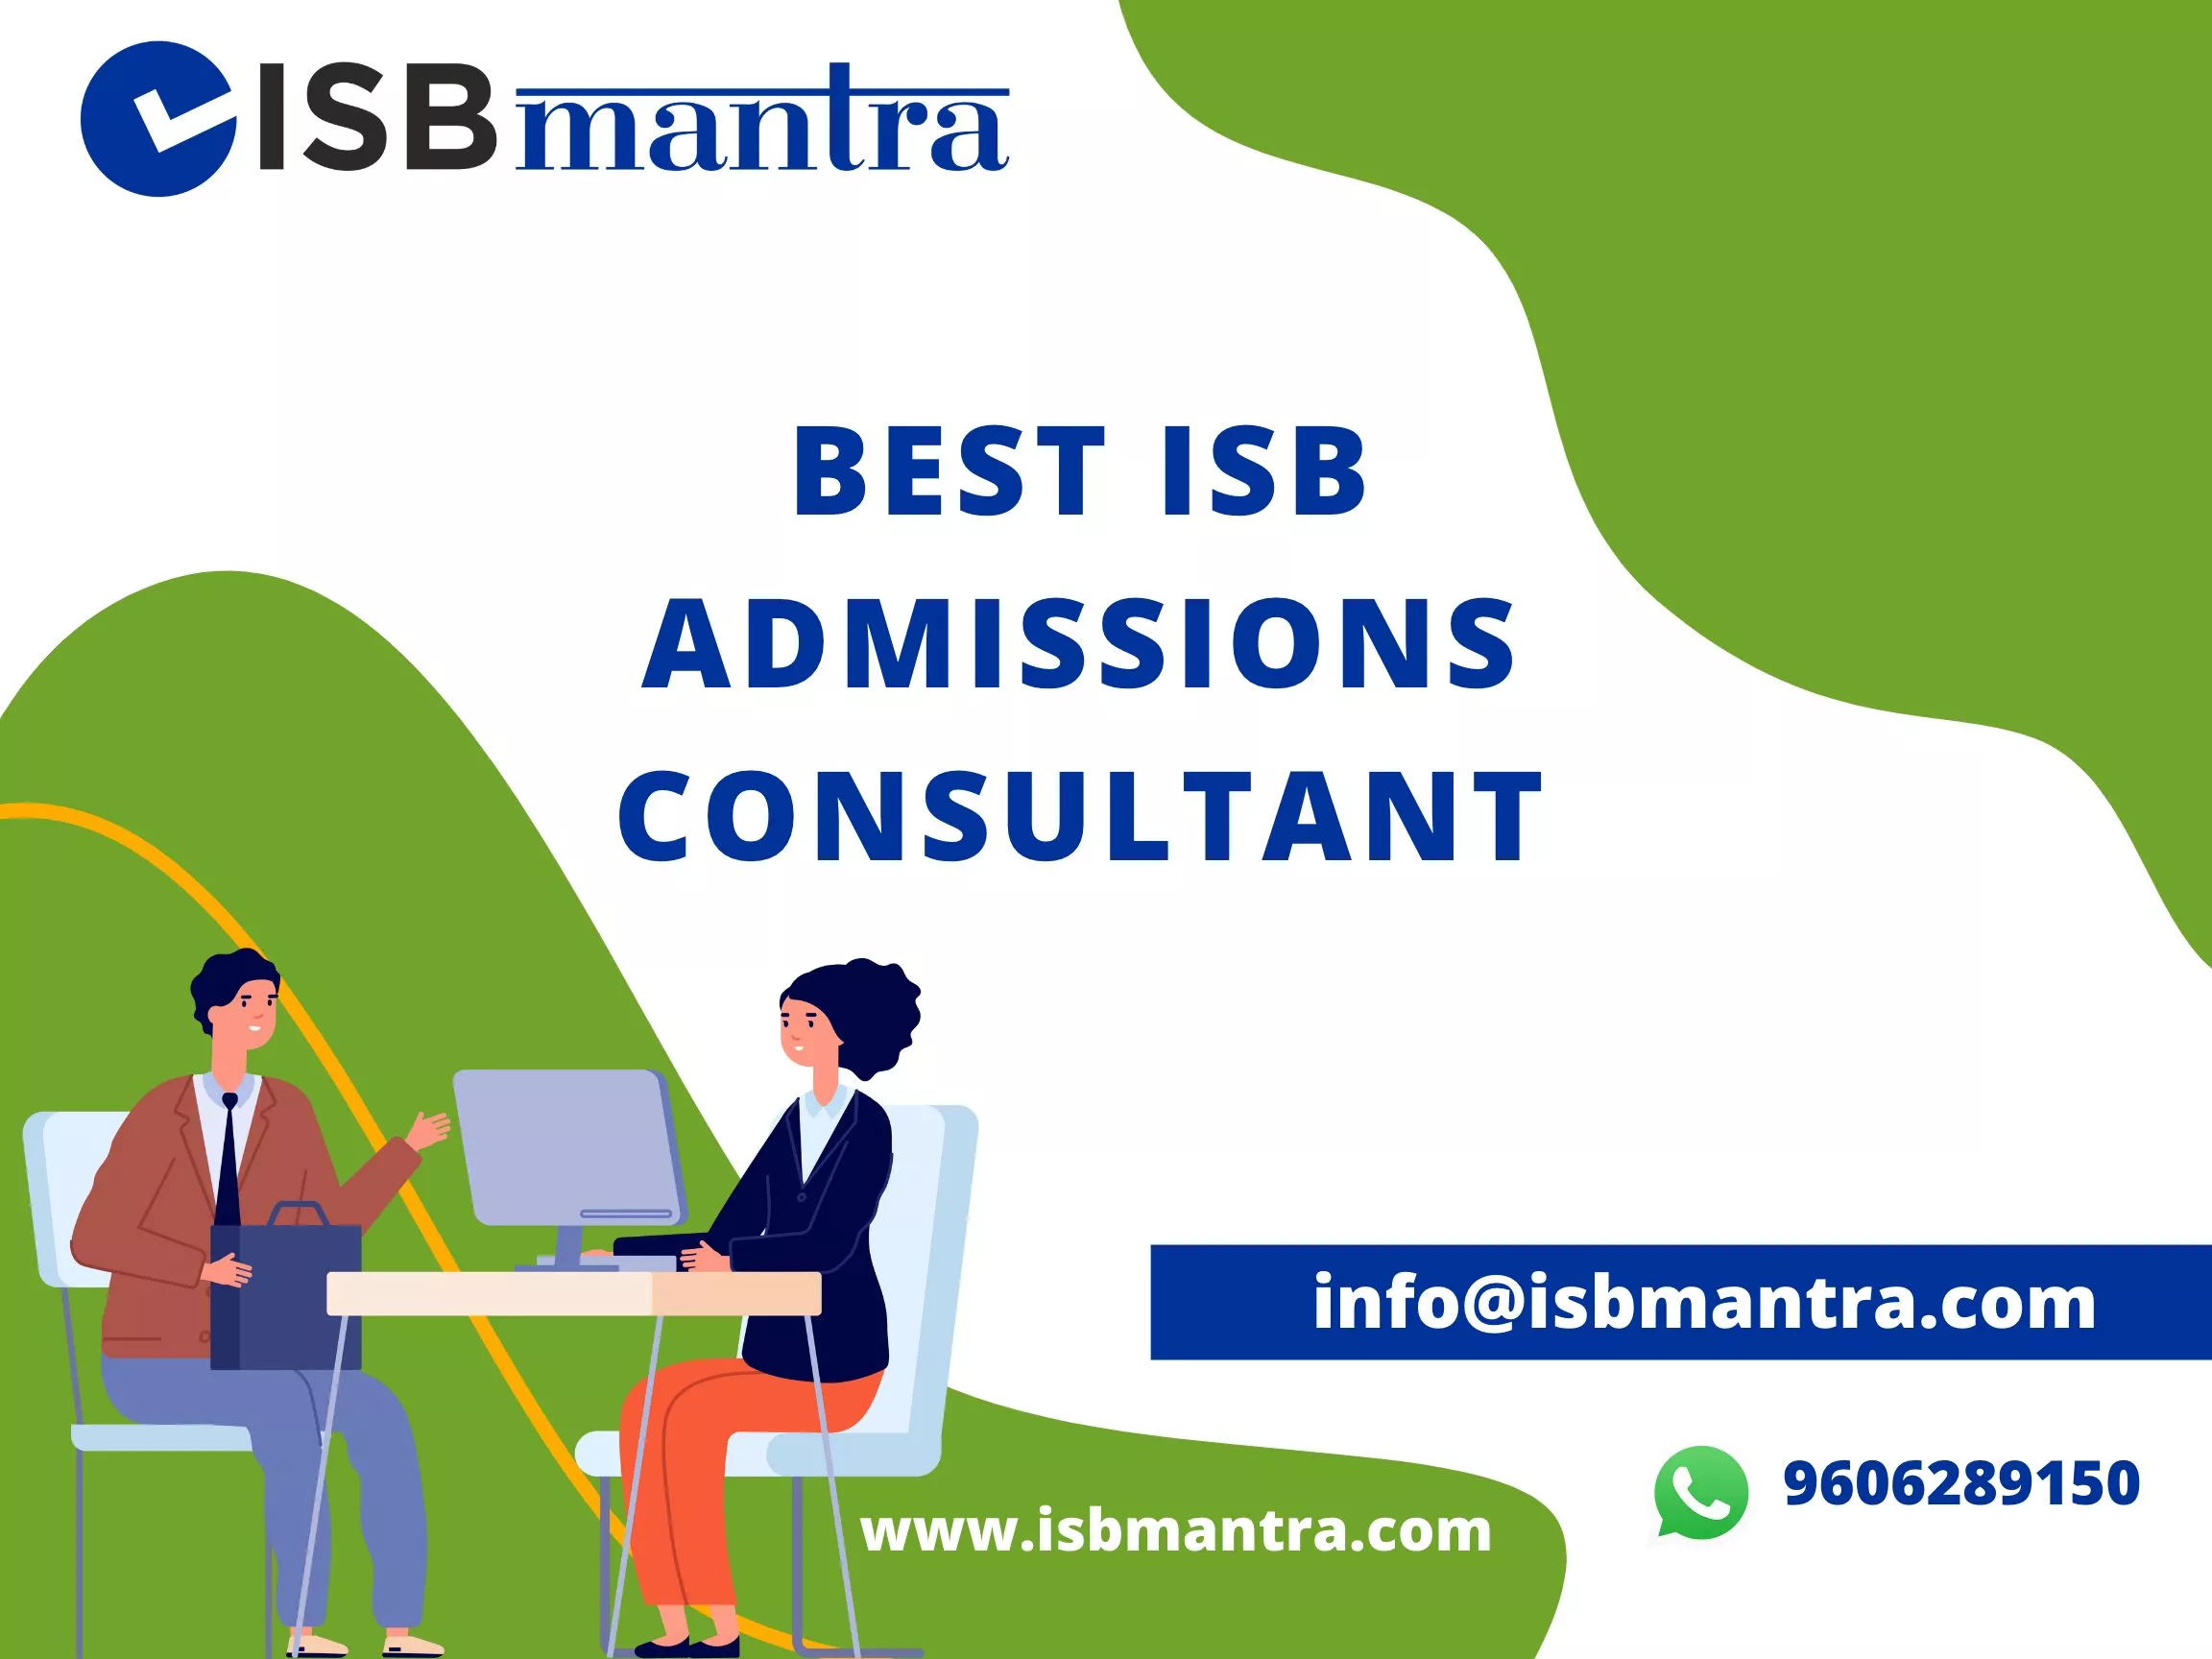 best ISB admissions consulting ISBmantra